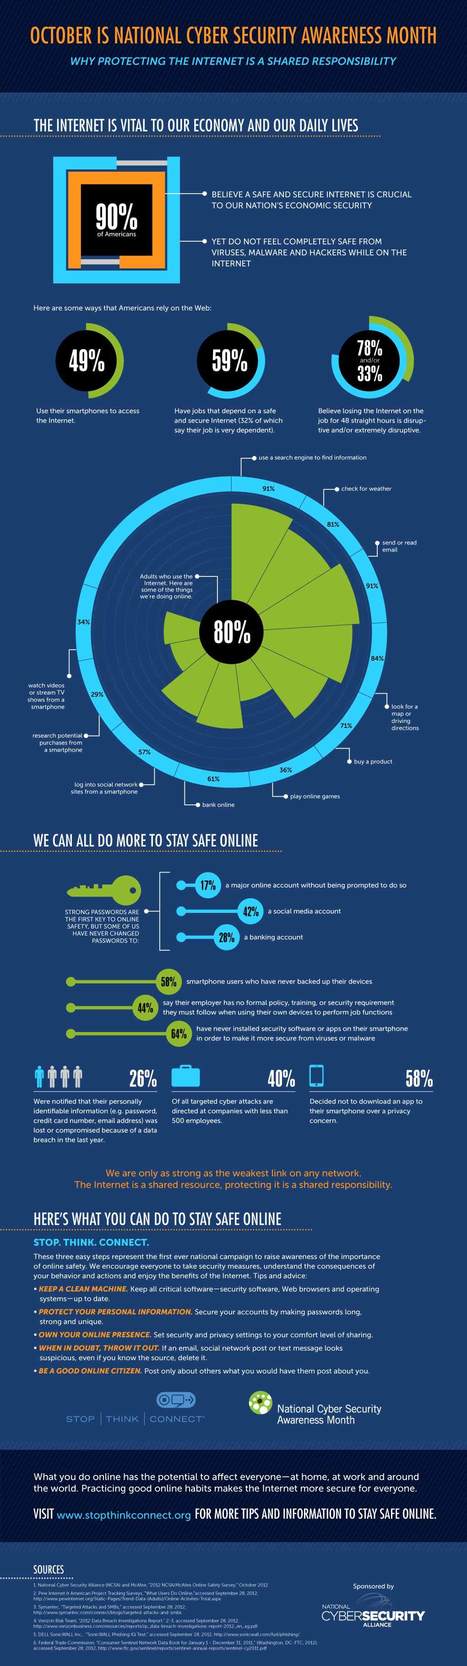 Protecting the Internet Infographic | StaySafeOnline.org | Social Media and its influence | Scoop.it